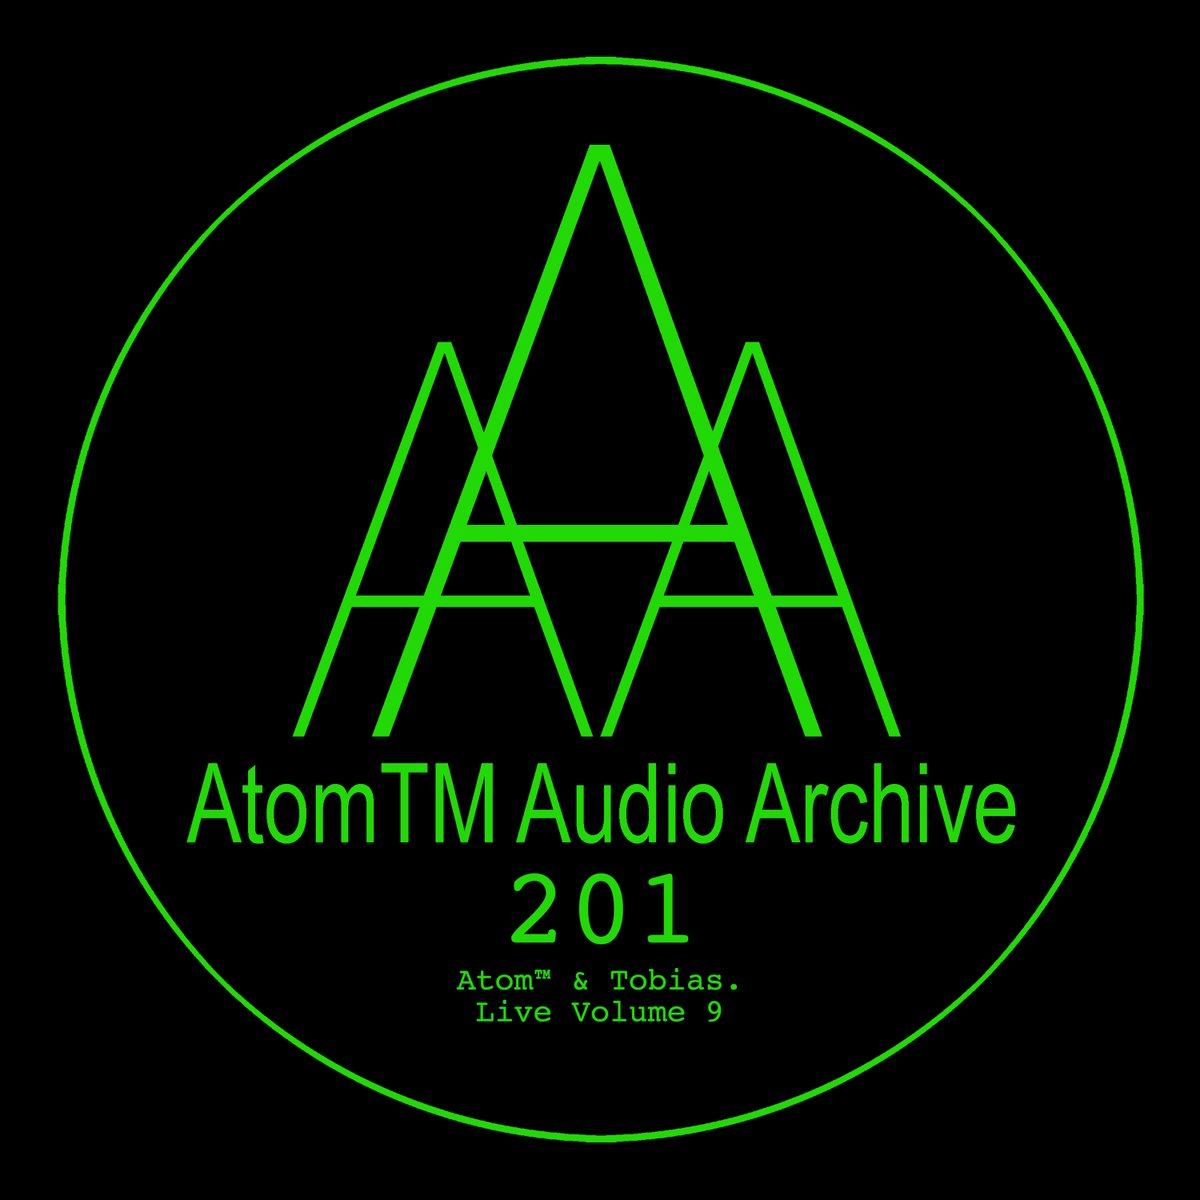 Out now: AtomTM & Tobias. Live Vol. 9 (Santiago, 28/01/2023) Available now on all digital music platforms or directly via AAA: atomtm.bandcamp.com/album/live-vol…